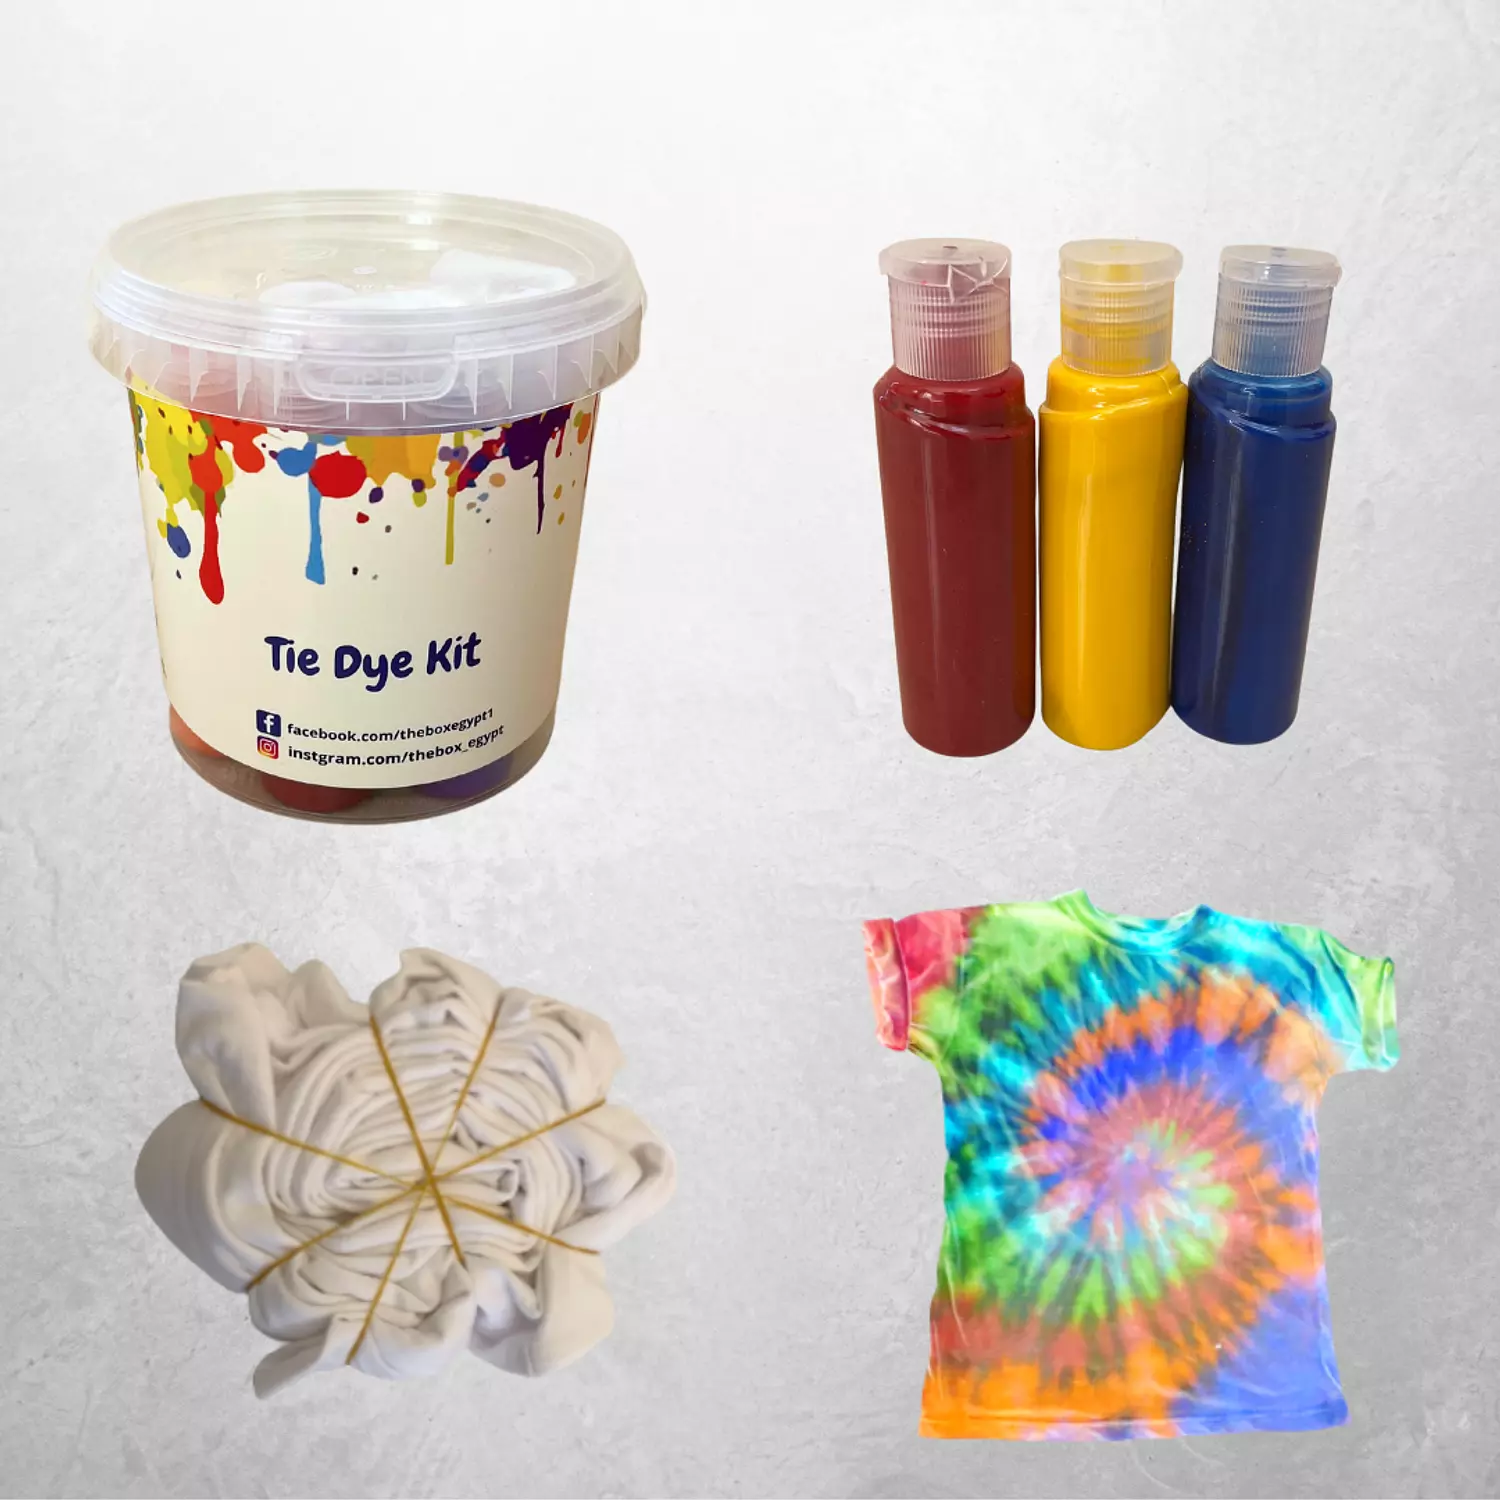 Tie dye 1 T-shirts kit  hover image